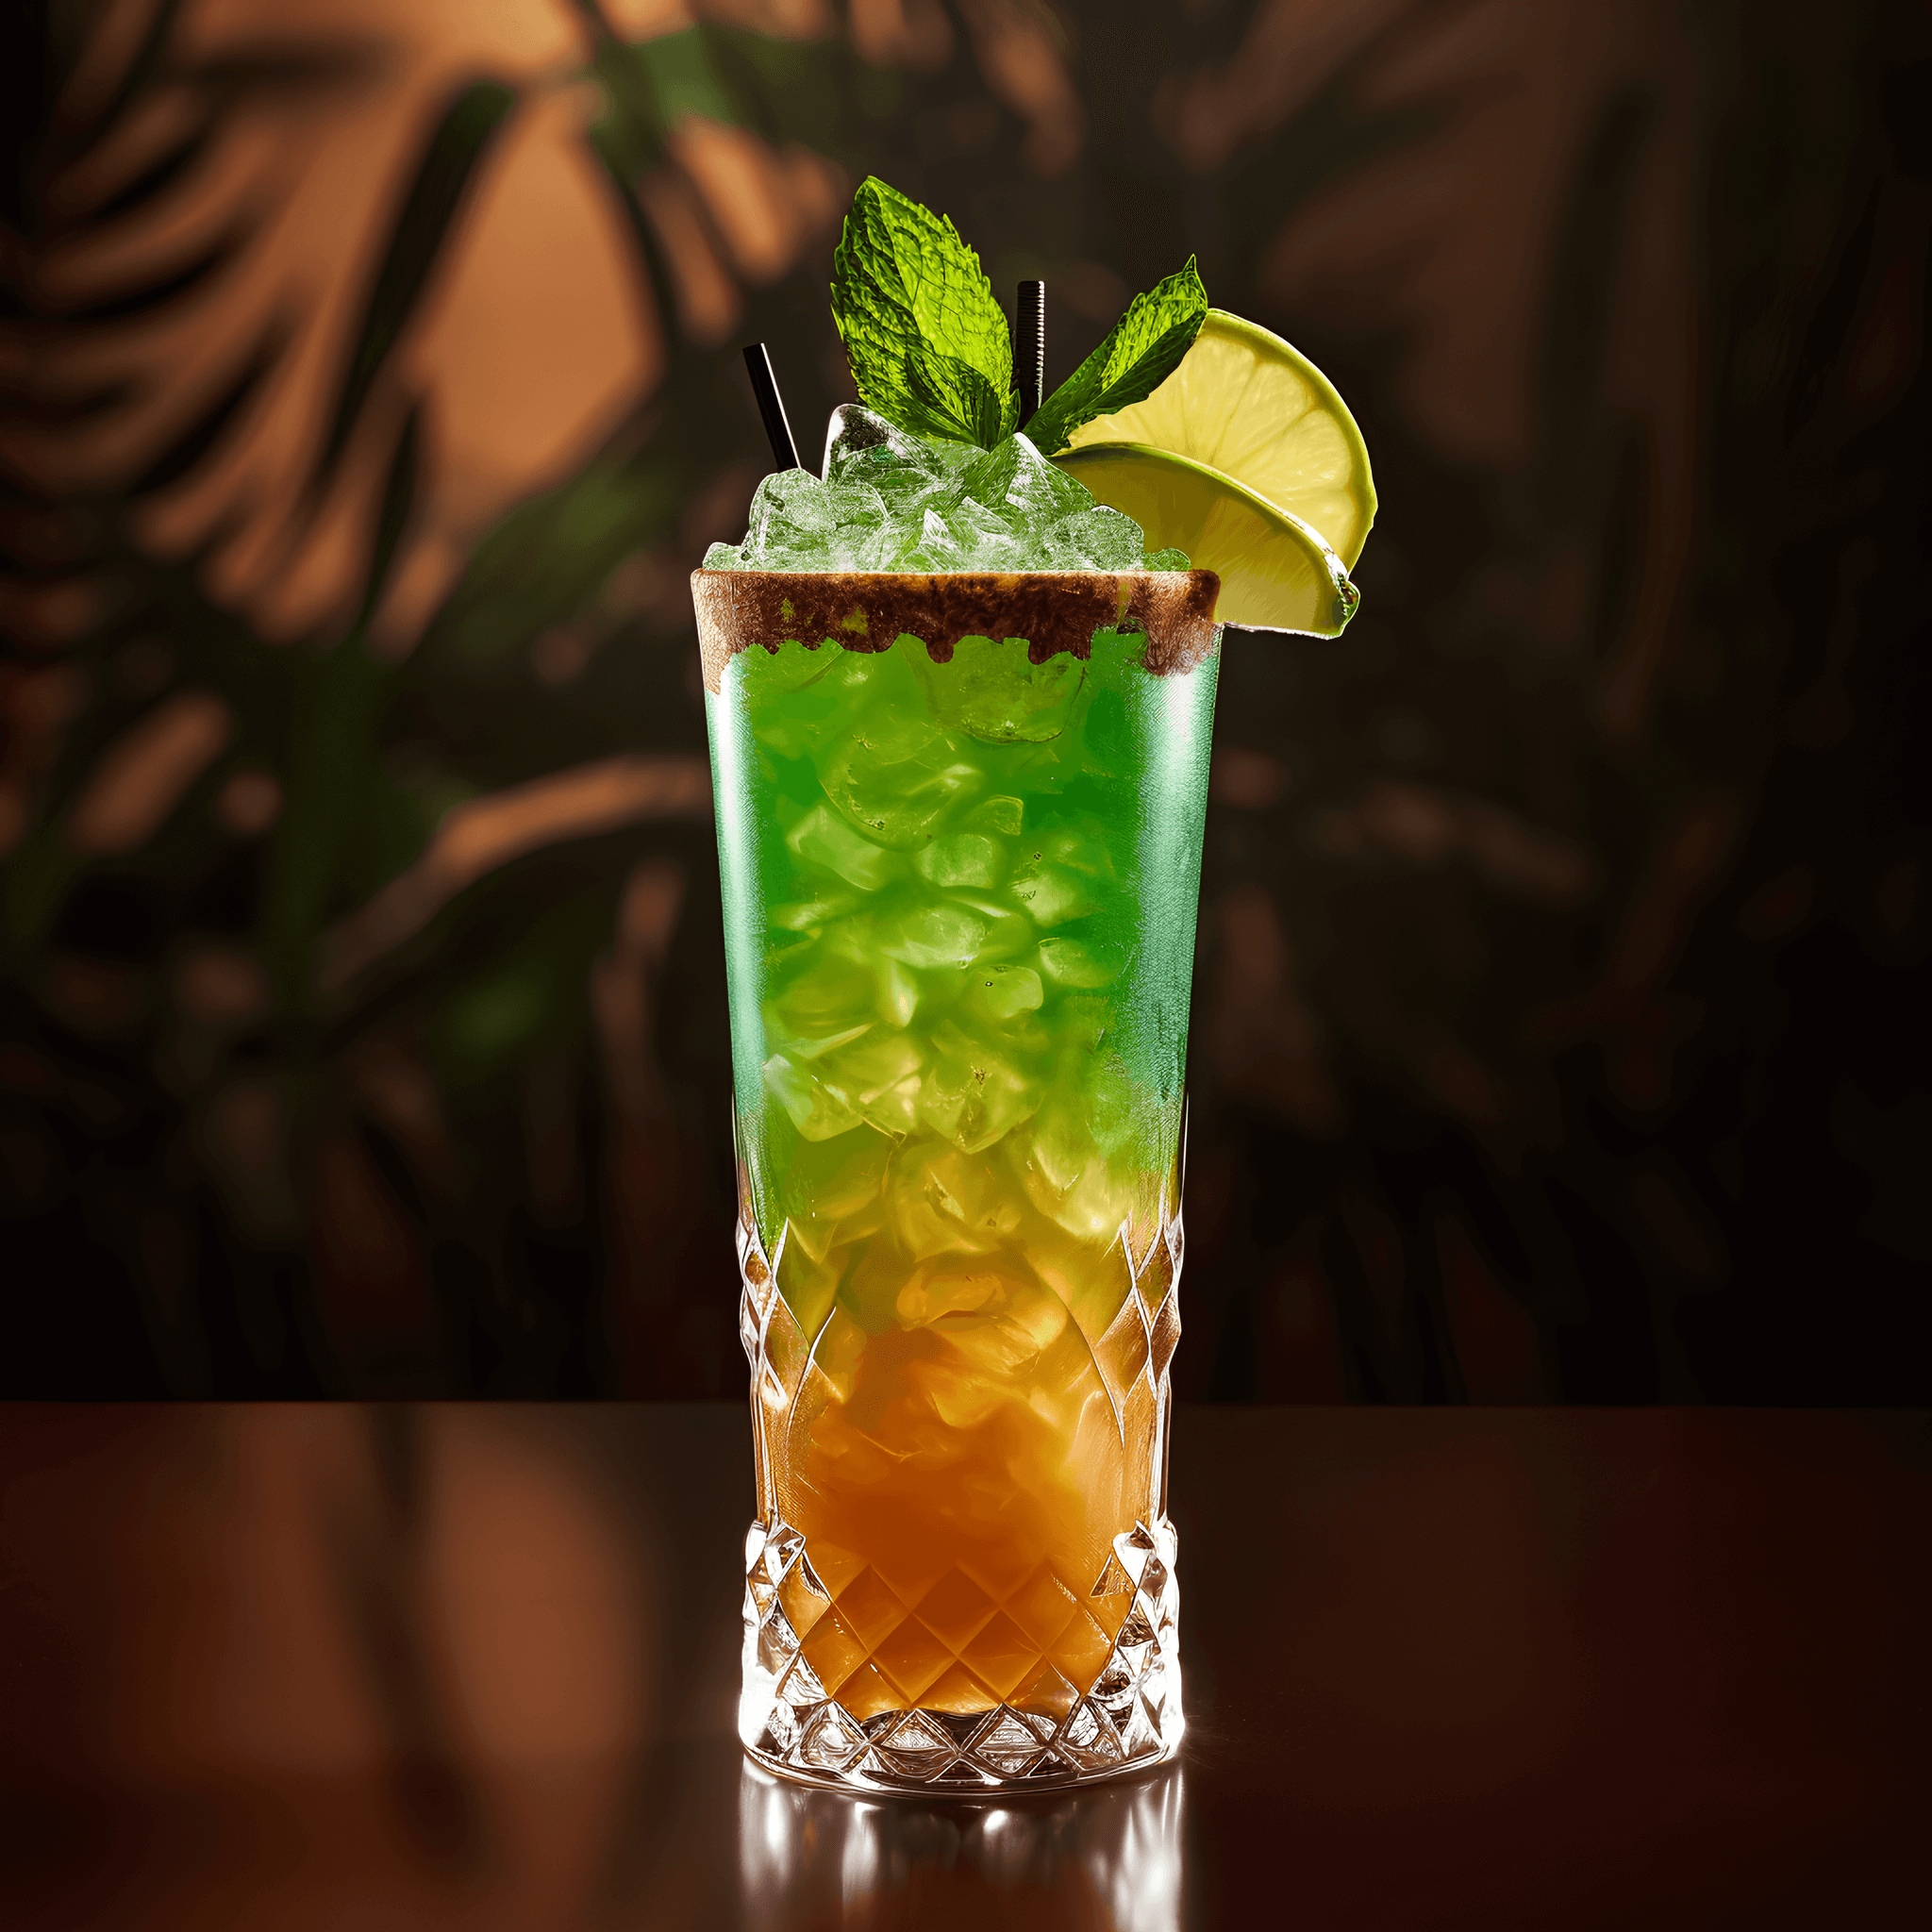 Mai Tai Cocktail Recipe - The Mai Tai has a balanced, sweet, and tangy taste with a hint of almond from the orgeat syrup. The combination of light and dark rums gives it a rich and complex flavor, while the lime juice adds a refreshing citrus note.